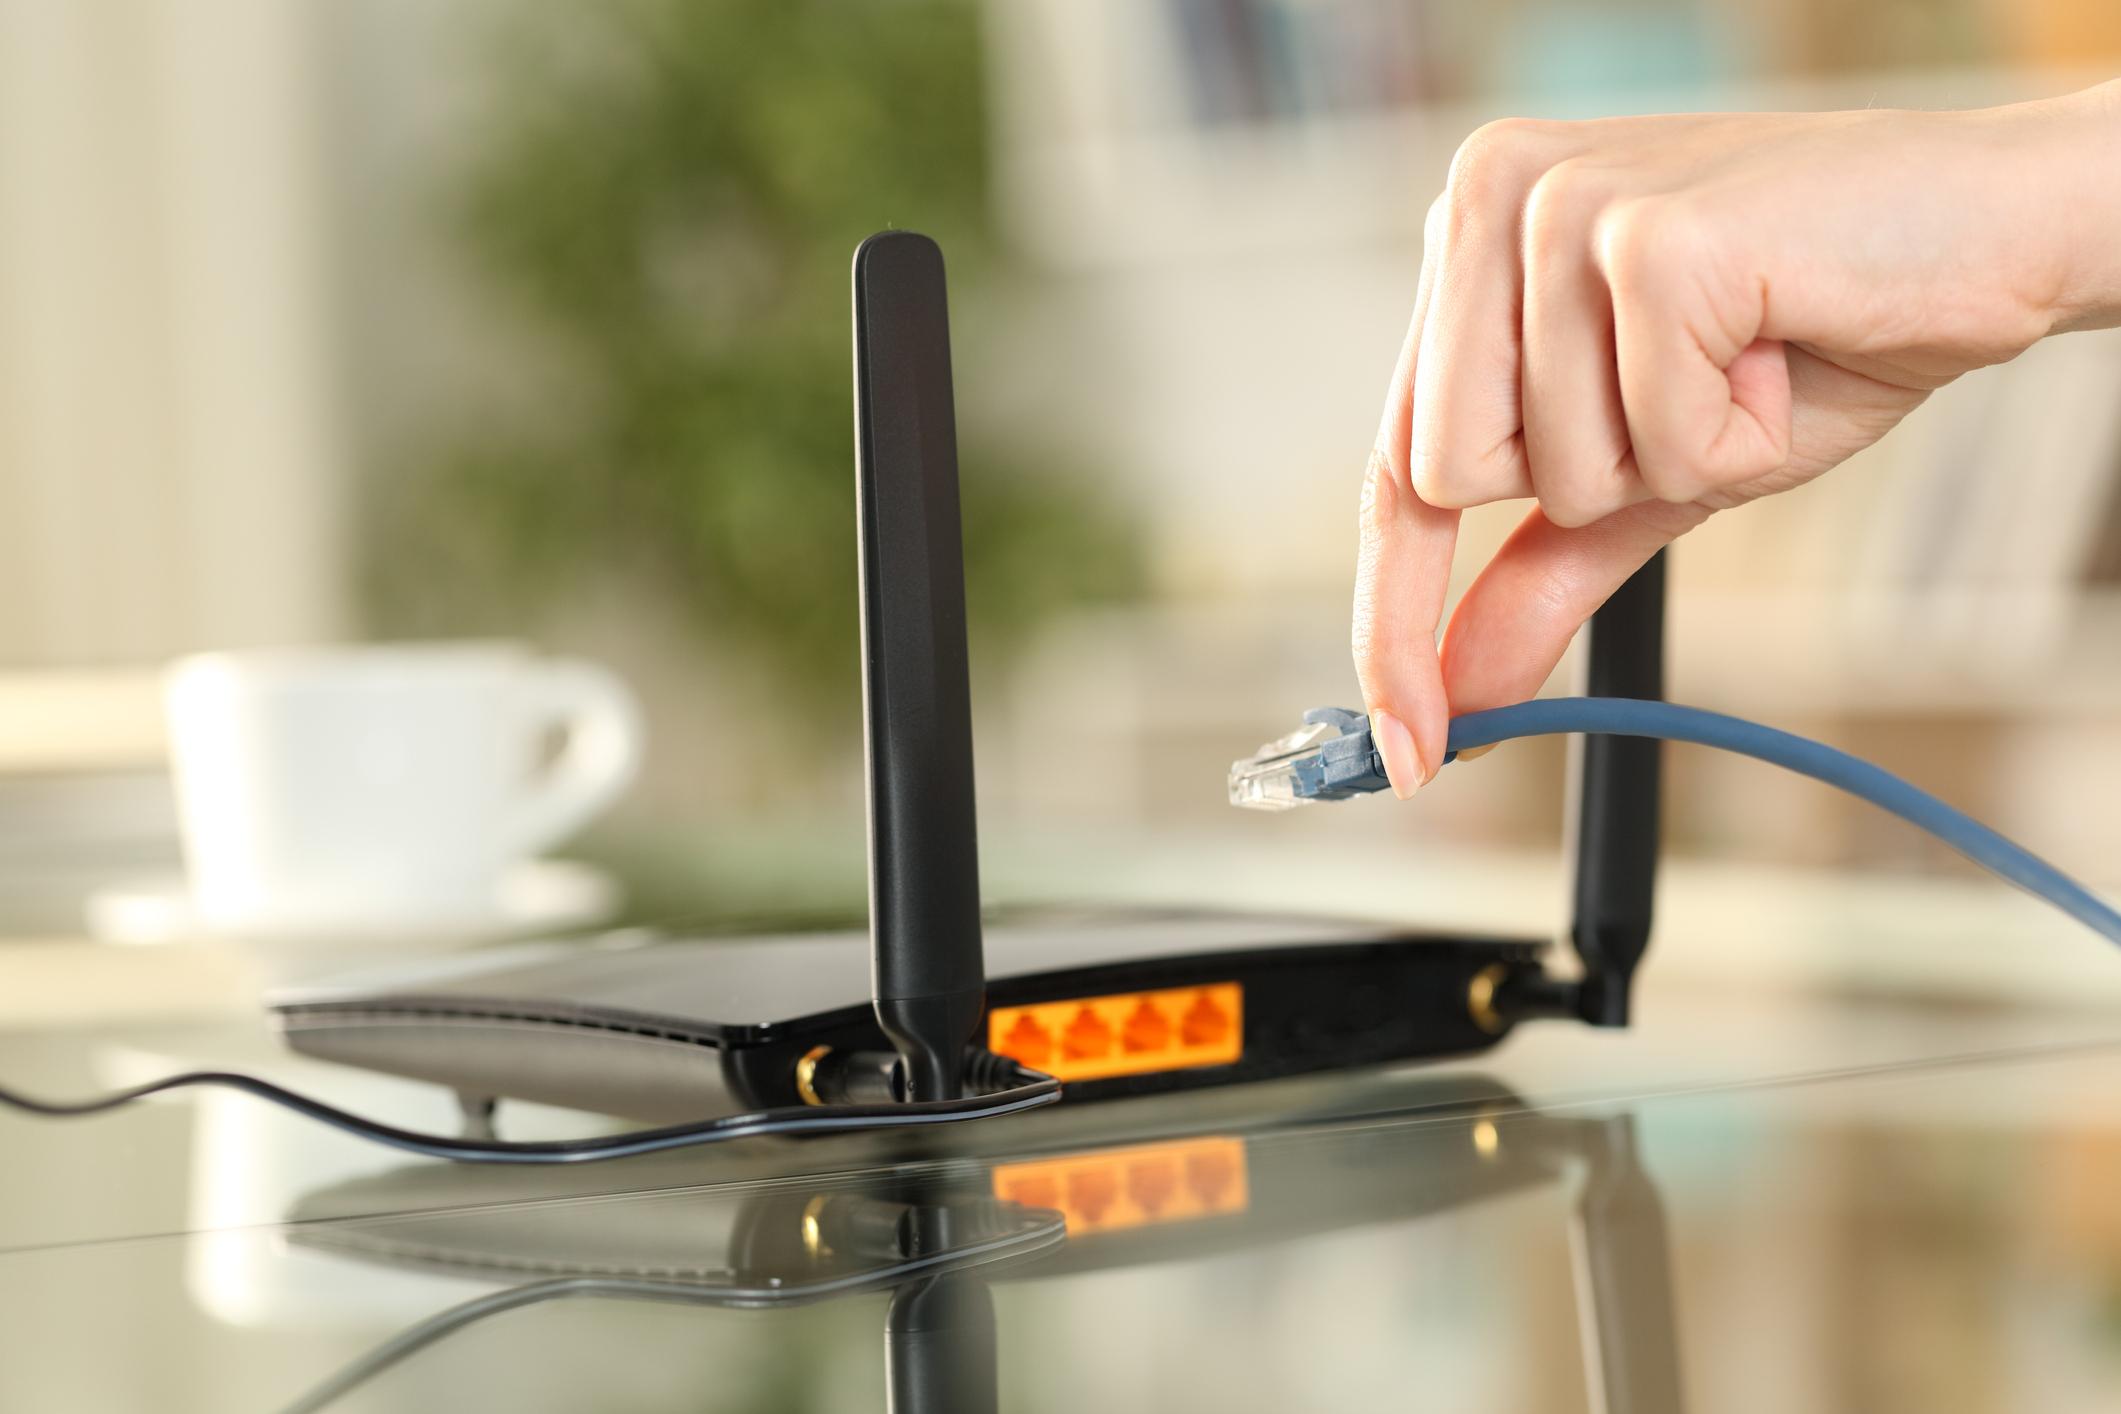 Mirai Botnet Exploits TP-Link Router Vulnerability: What to Know and How to Protect Your Device